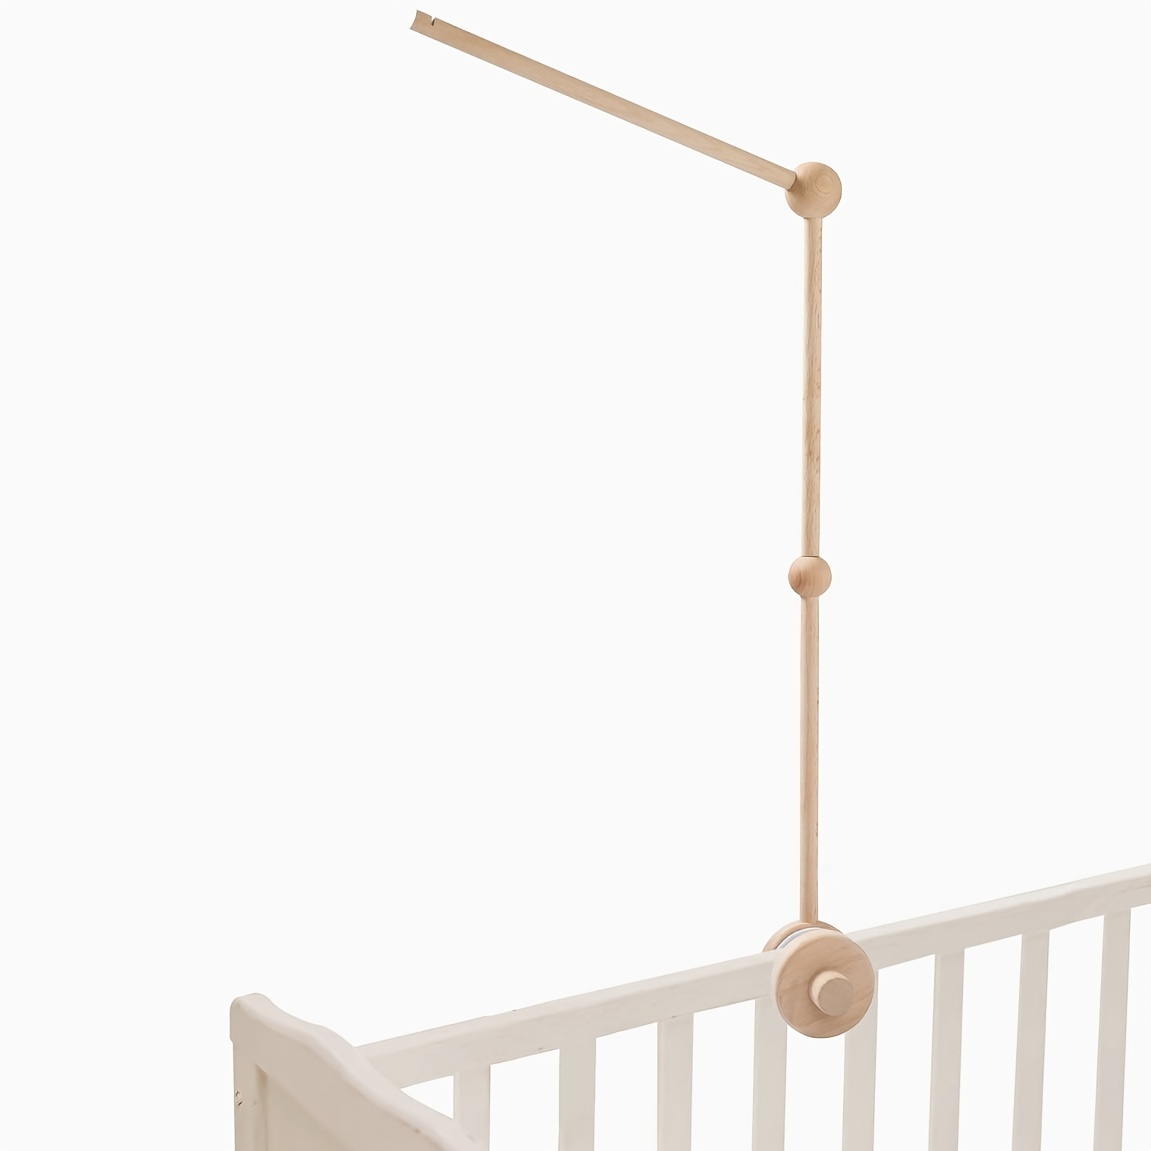  HBM Wooden Mobile Arm for Crib 19-37 Inch Adjustable Baby  Mobile Hanger Beech Wood Mobile Crib Arm Attachment,Anti Slip for Sturdy  Crib : Baby